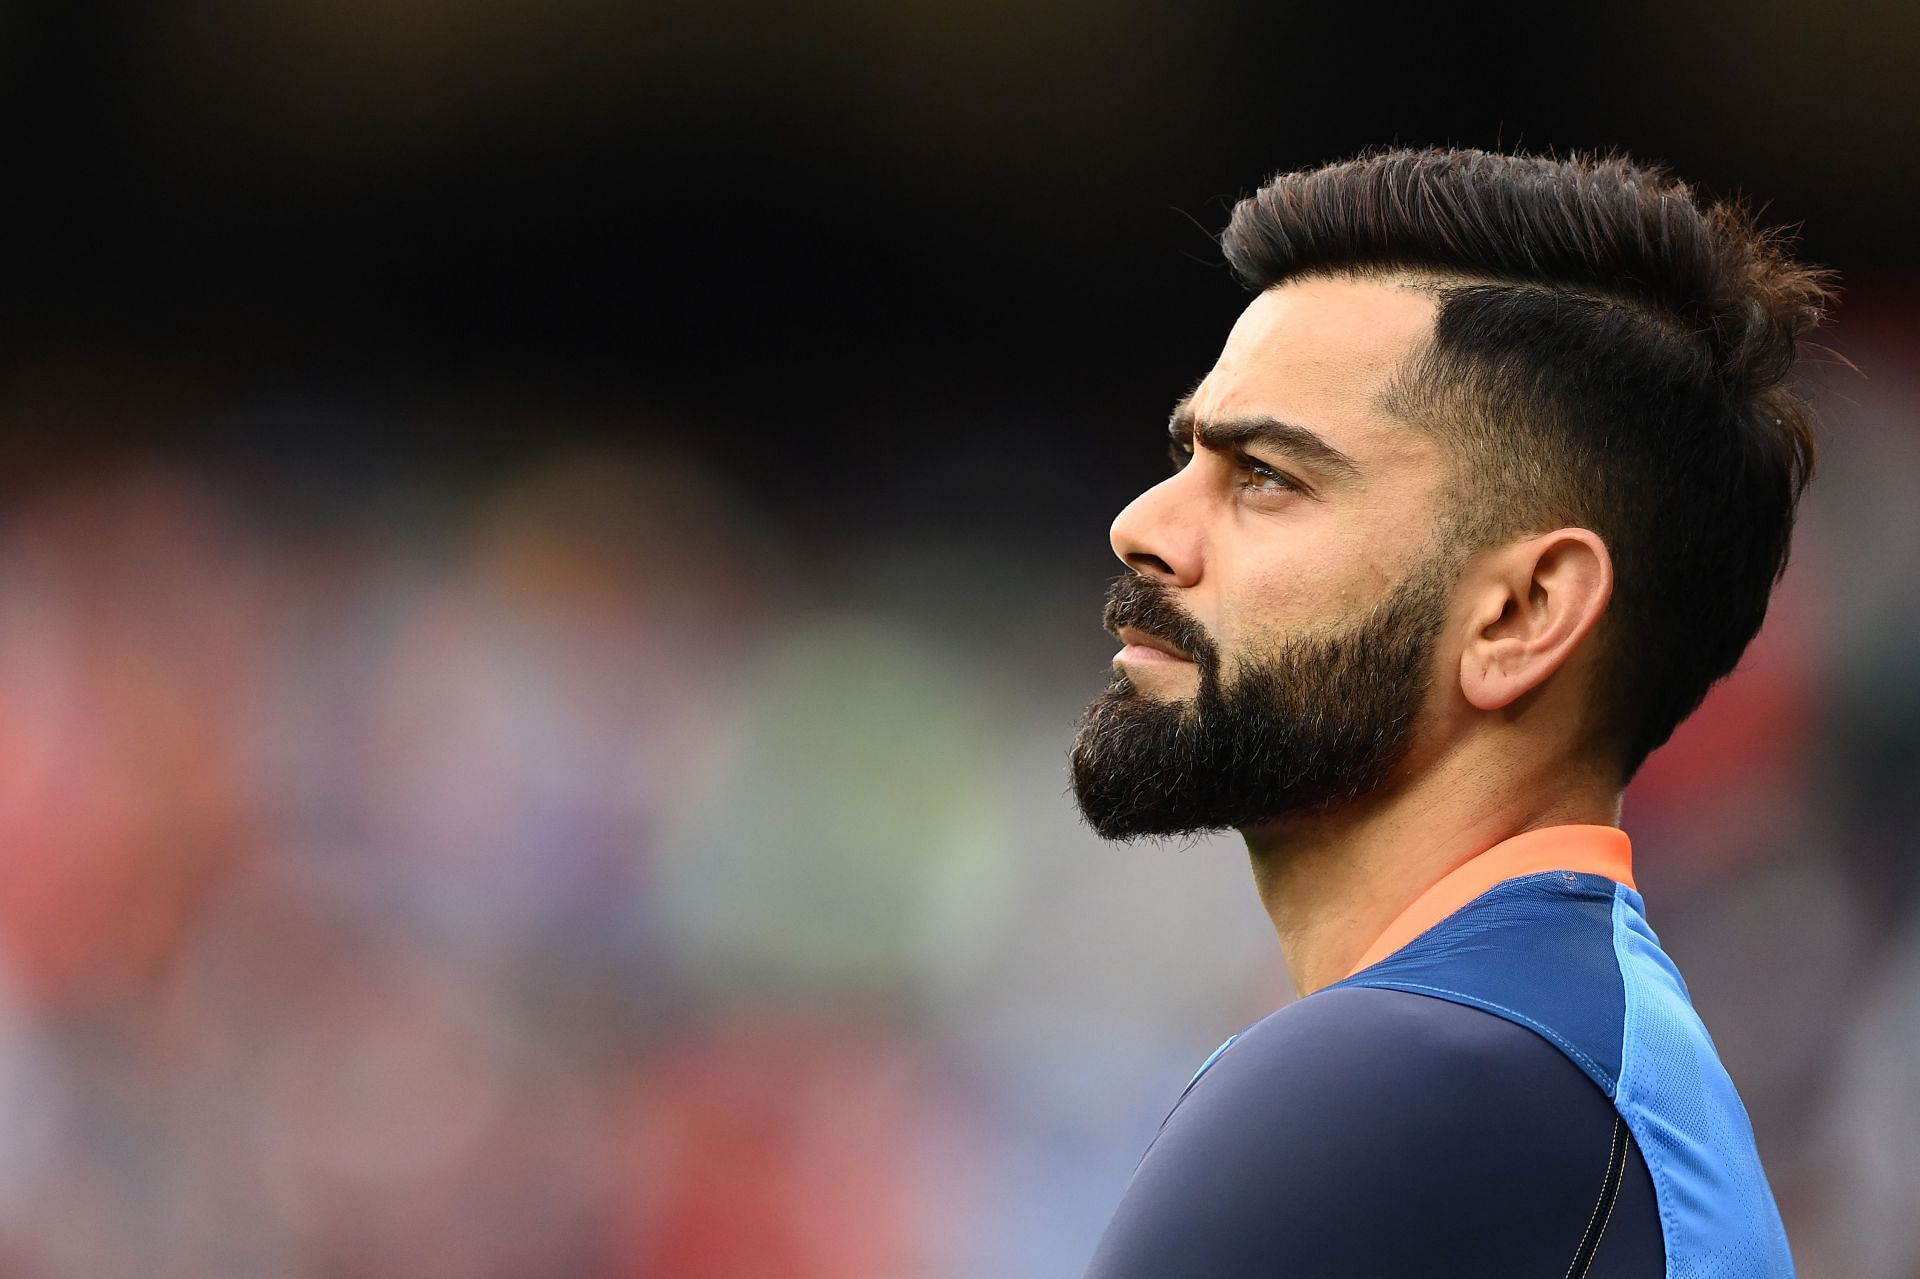 Who Is Virat Kohli's Hair Stylist? Find Out Here